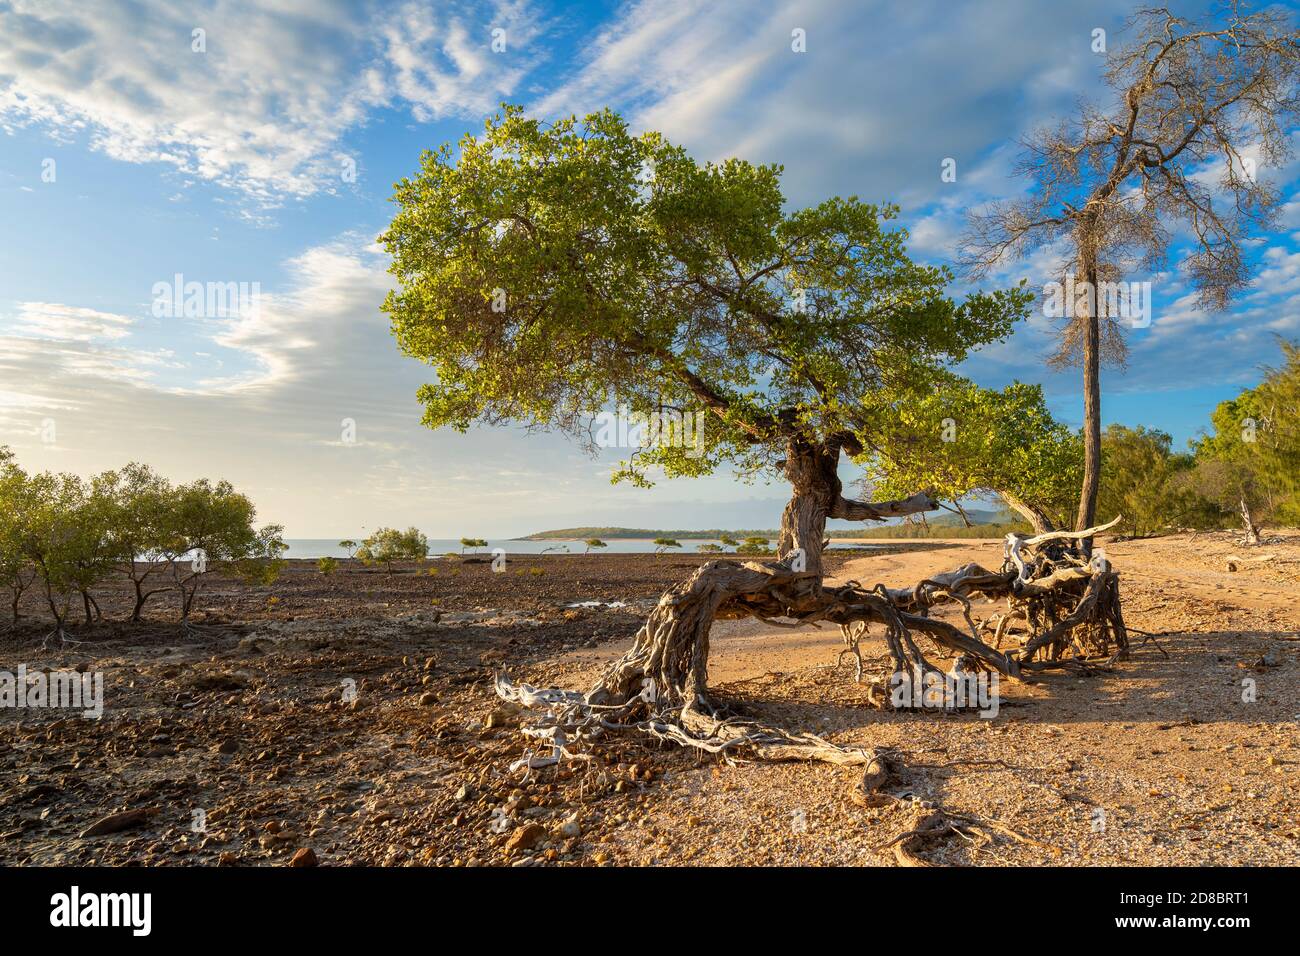 Mangrove roots exposed due to changing beach conditions, Clairview, Central Queensland, Australia Stock Photo